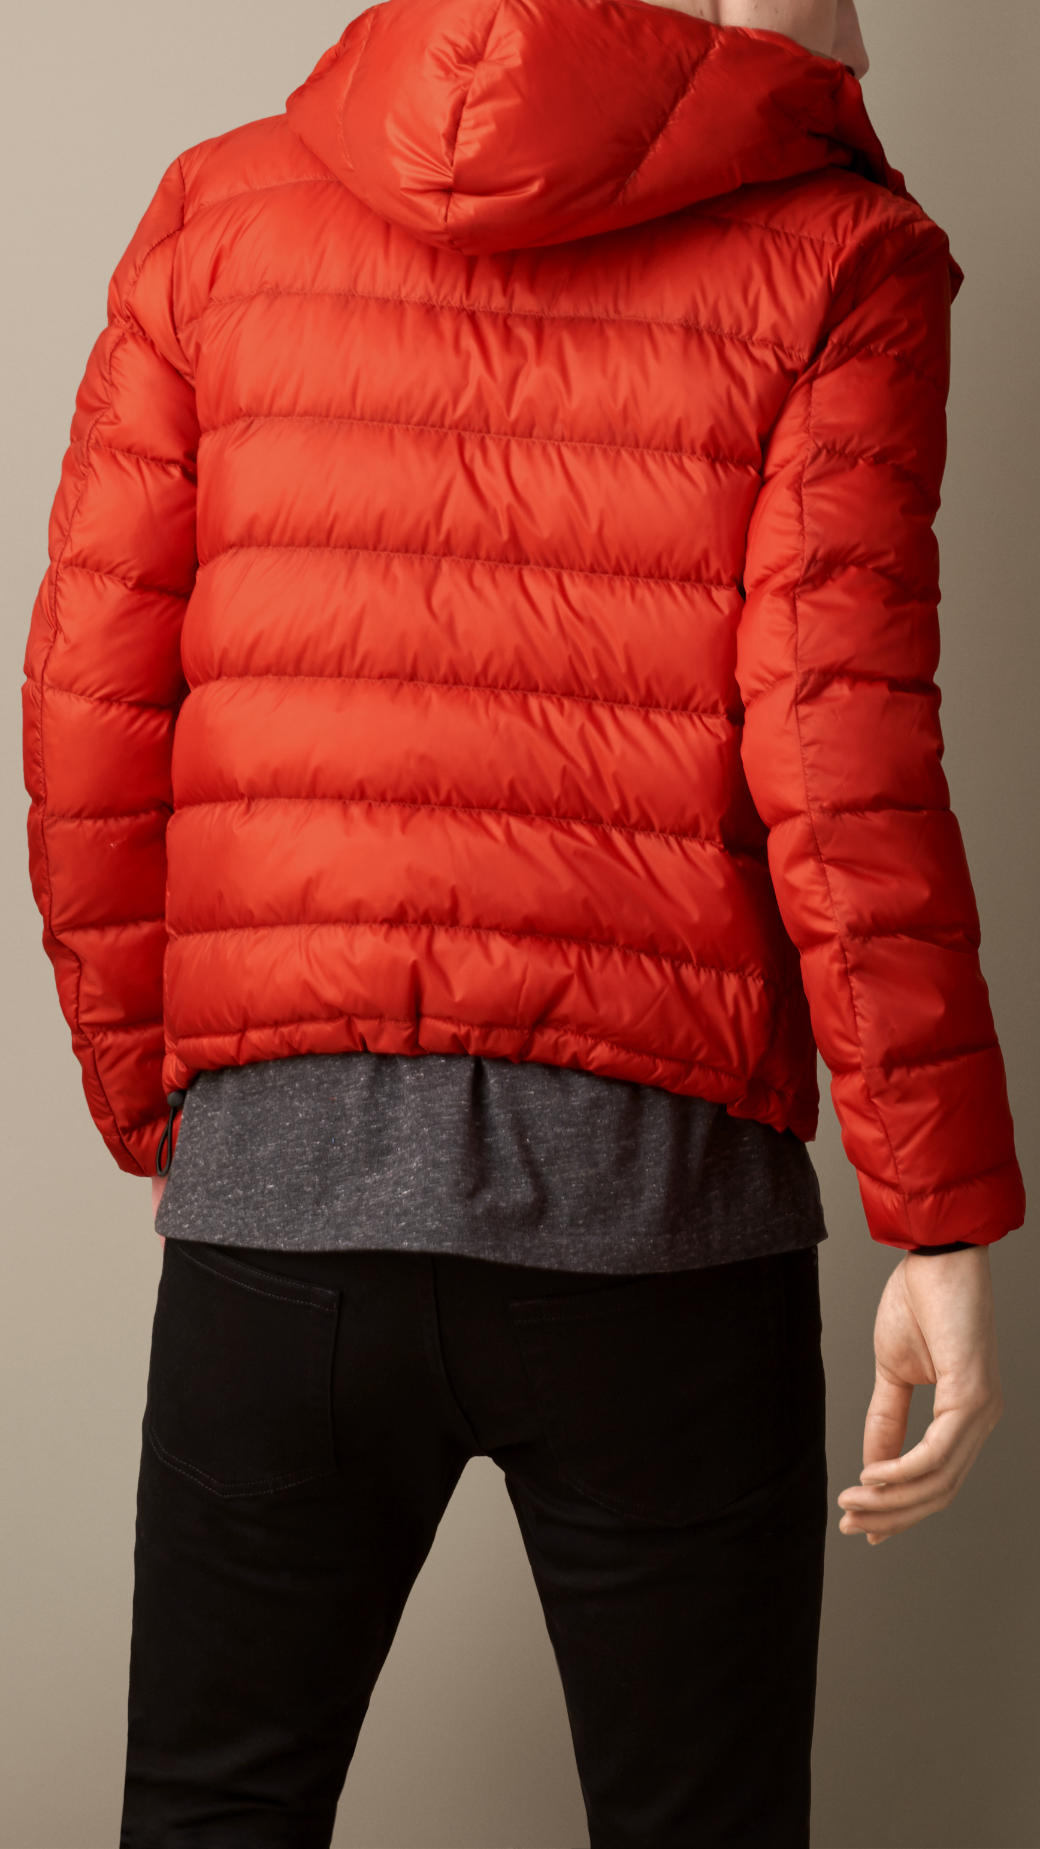 The north face puffer jacket with hood